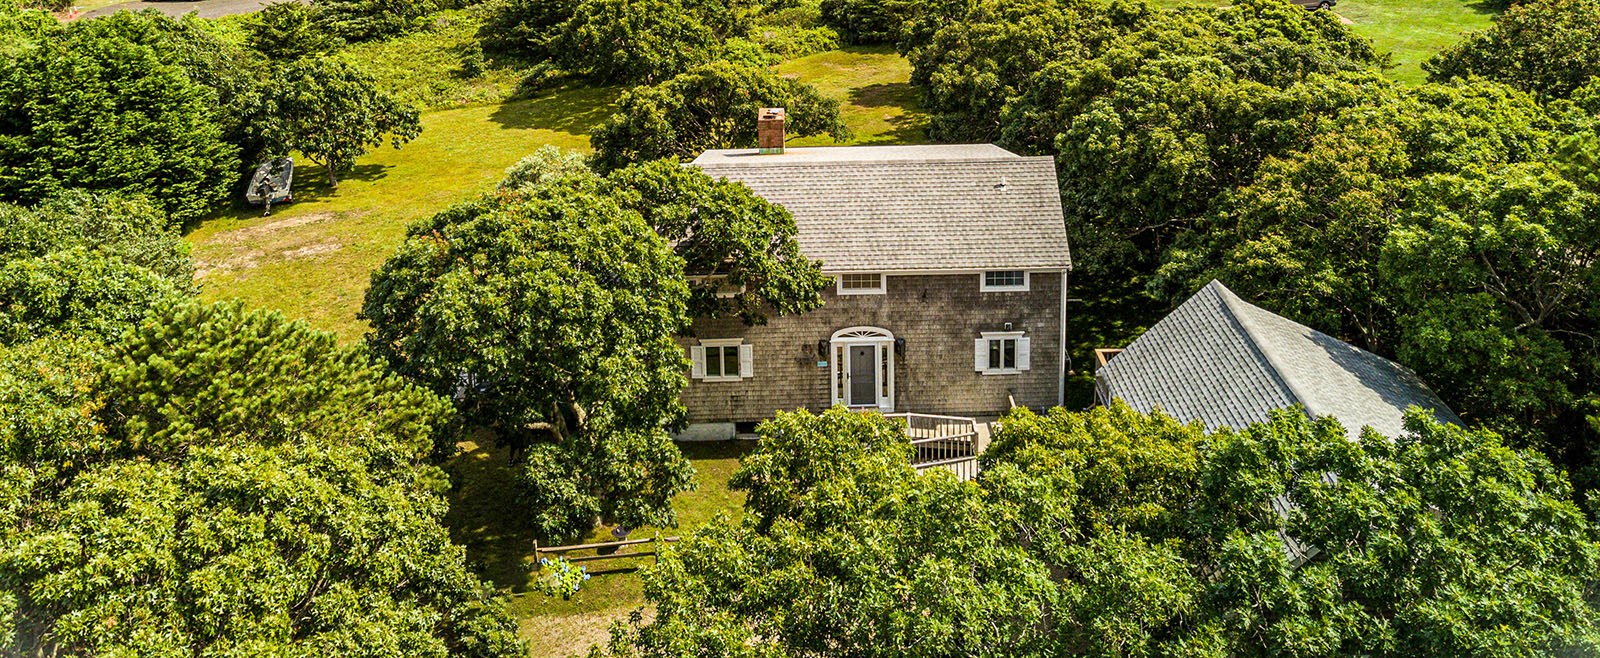 We all need a vacation. For those who especially love the Vineyard, we have collected a group of homes that are emblematic of the enchantment this island offers!